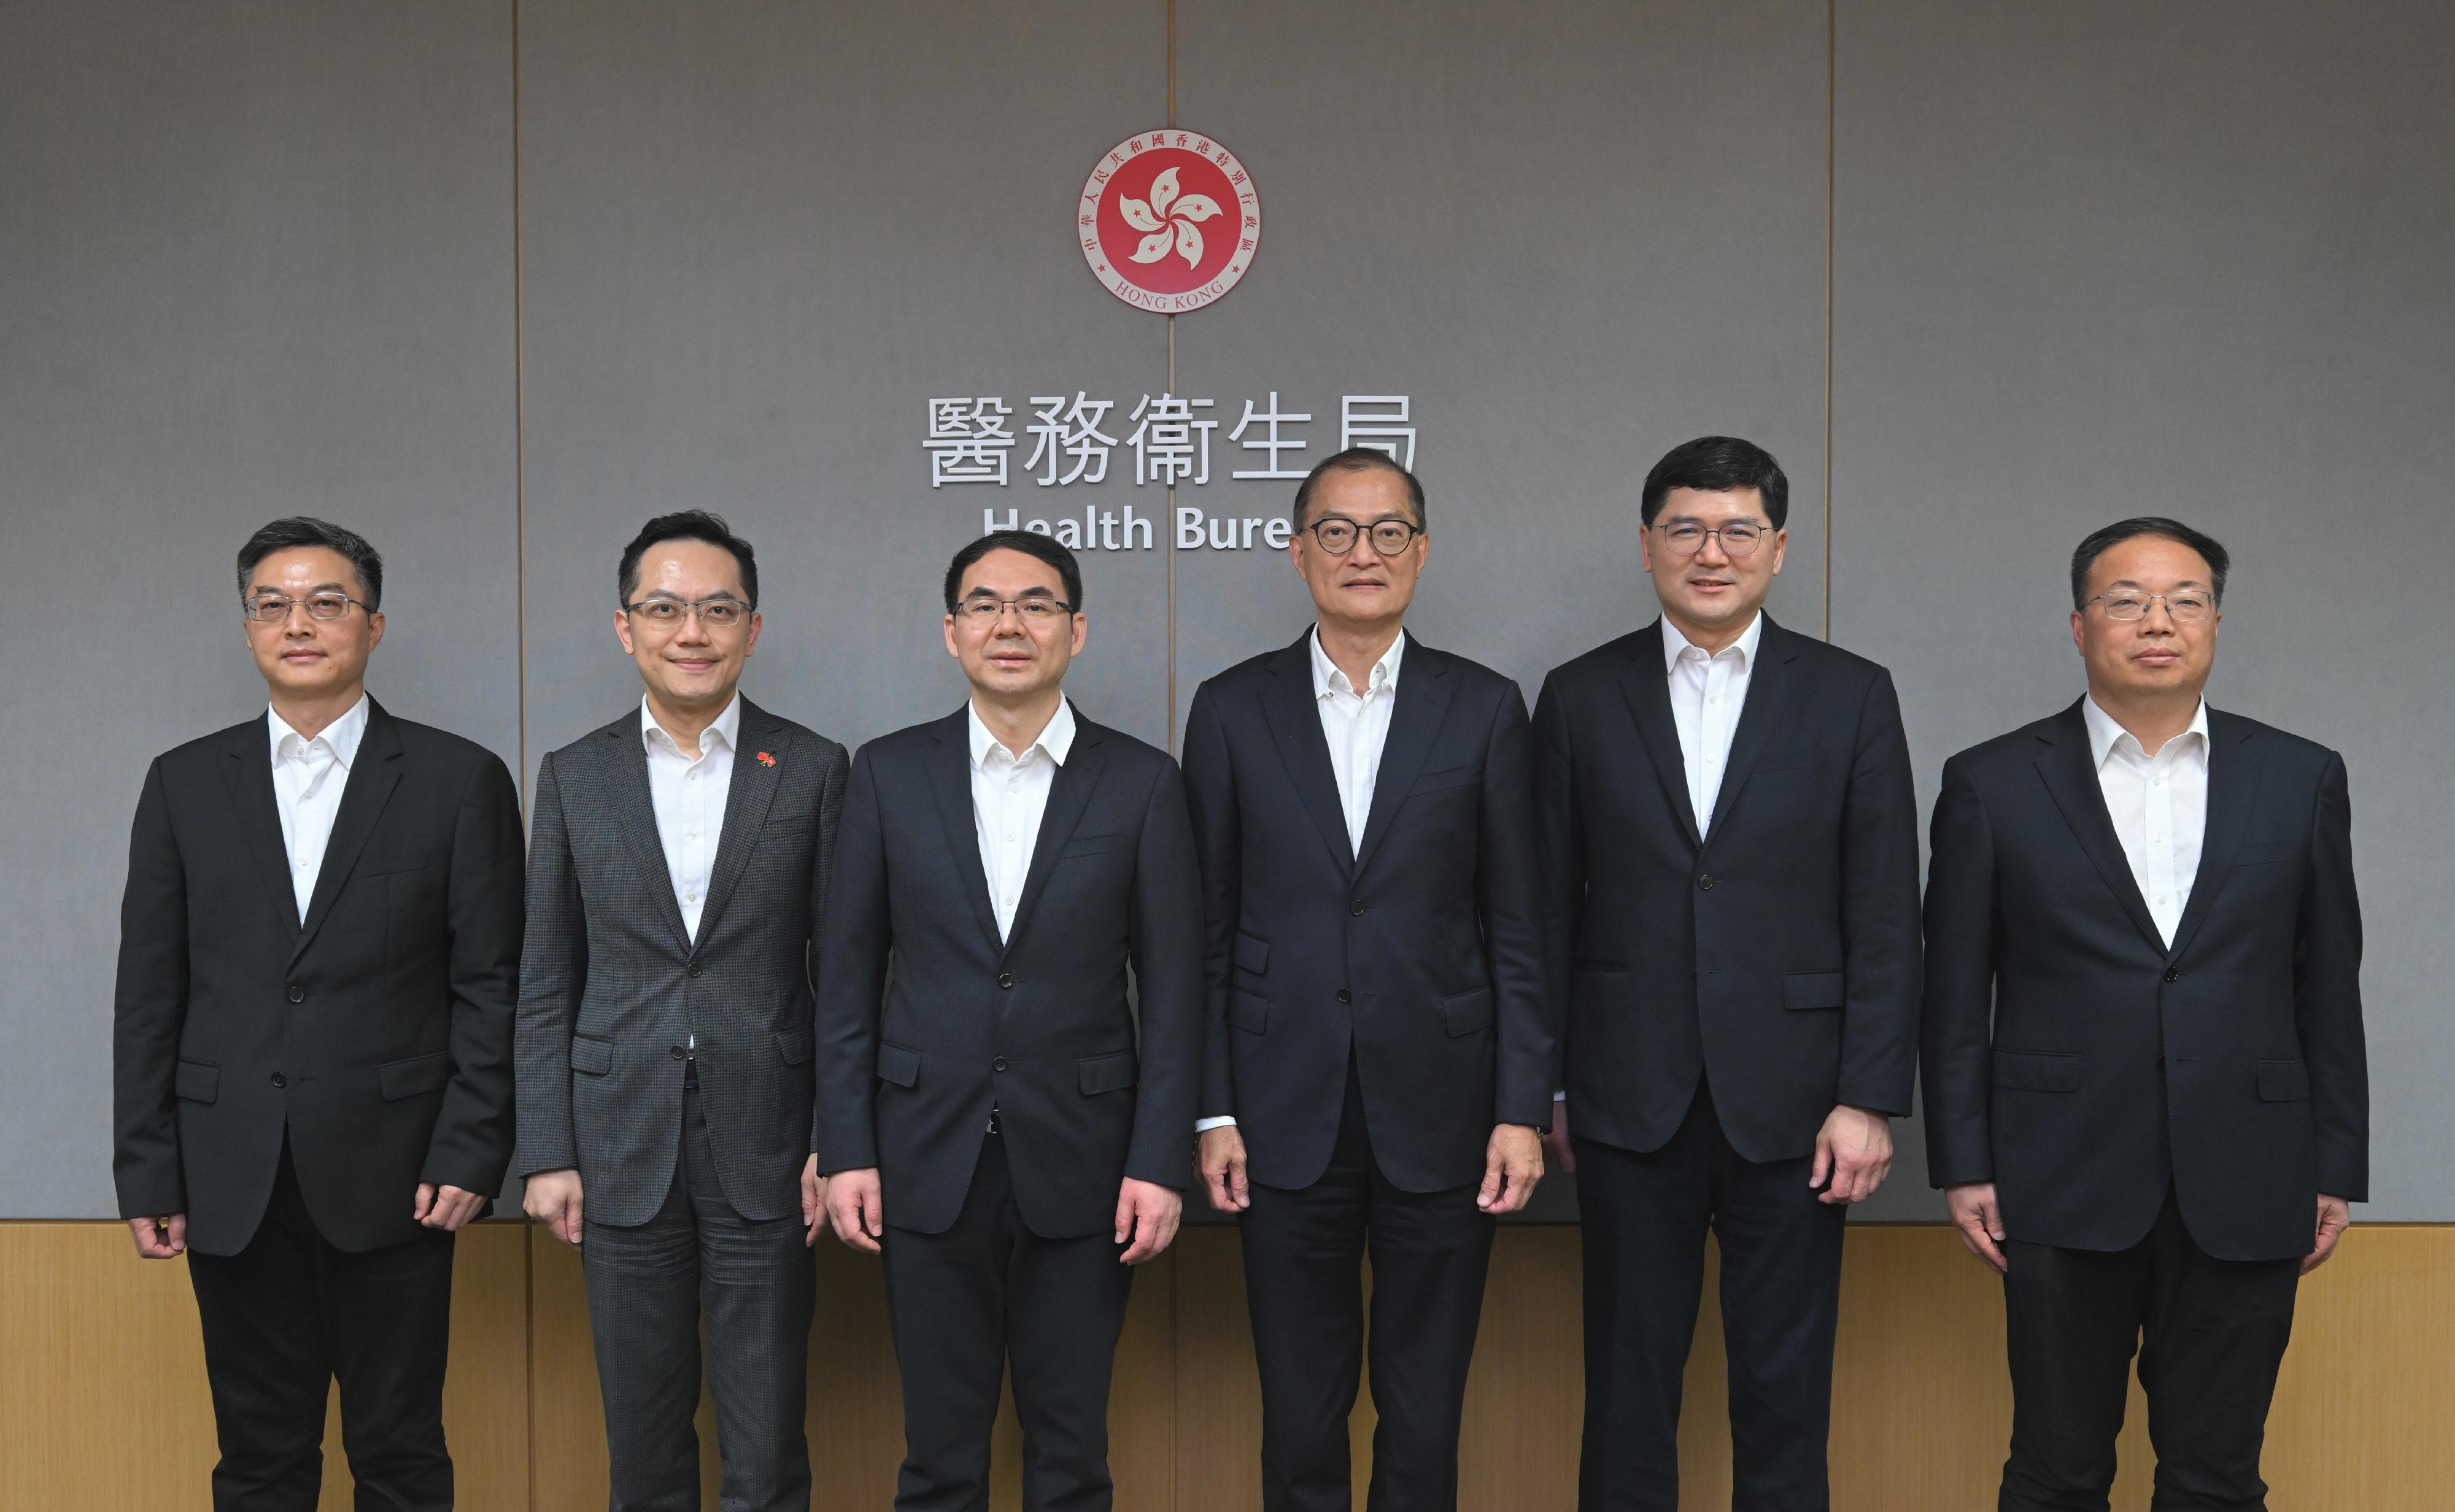 The Secretary for Health, Professor Lo Chung-mau, met with a delegation from the People’s Government of Guangzhou Municipality at the Central Government Offices today (May 4). Photo shows Professor Lo (third right); the Vice-Mayor of the People’s Government of Guangzhou Municipality and Director General of Guangzhou Municipal Health Commission, Mr Lai Zhihong (third left); the Director of Health, Dr Ronald Lam (second left); the Chief Executive of the Hospital Authority, Dr Tony Ko (second right), and other attendees.